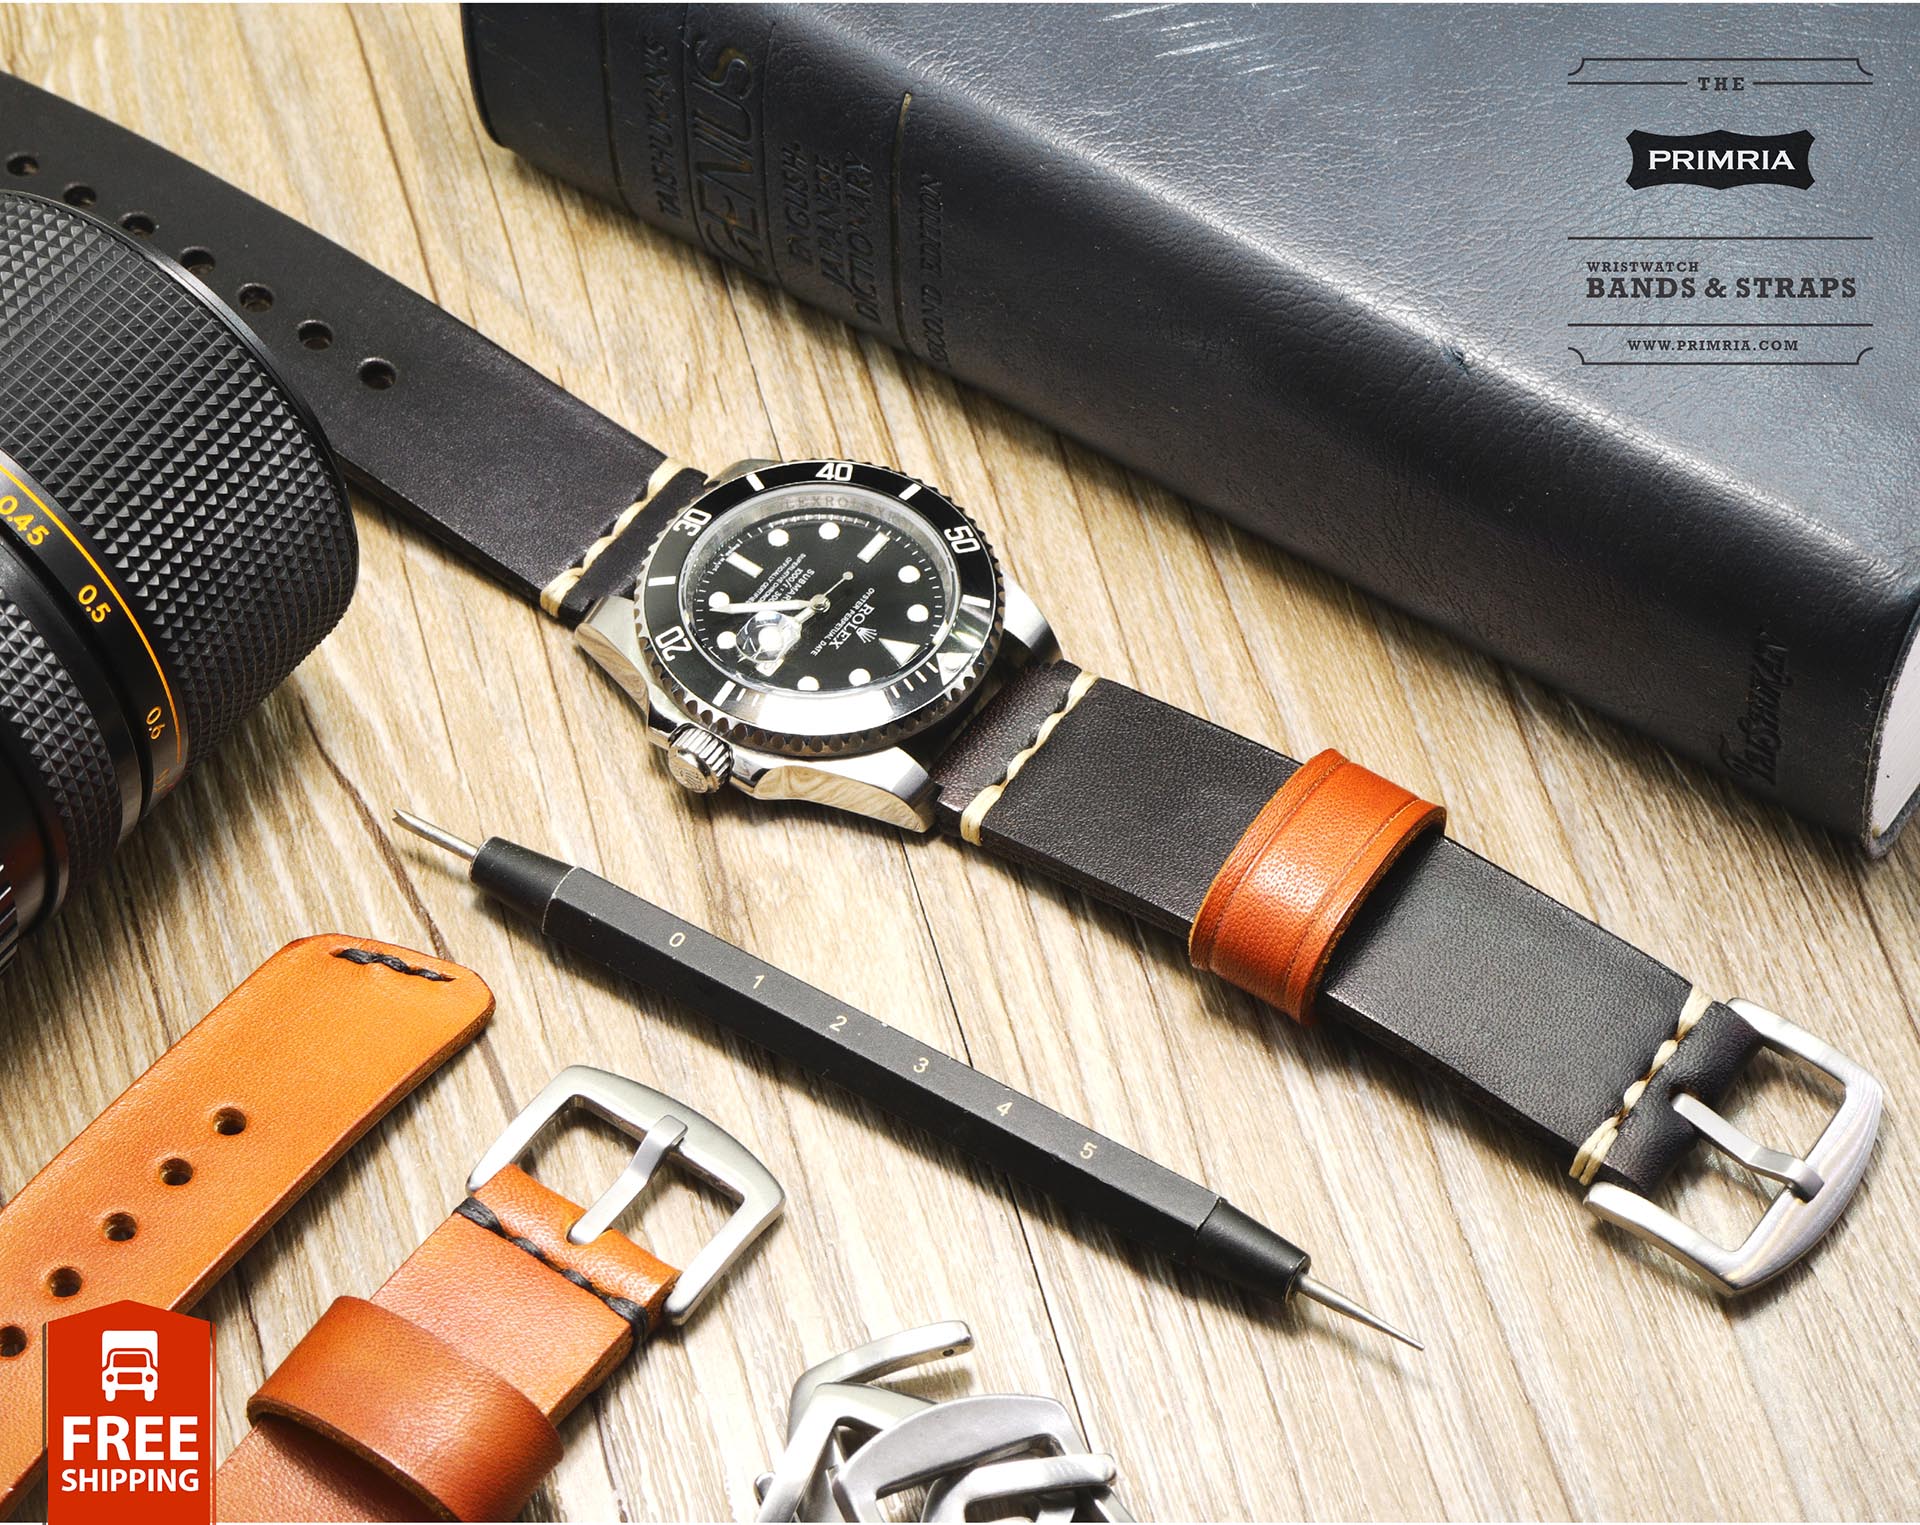 Leather Watch Bands, Leather Straps